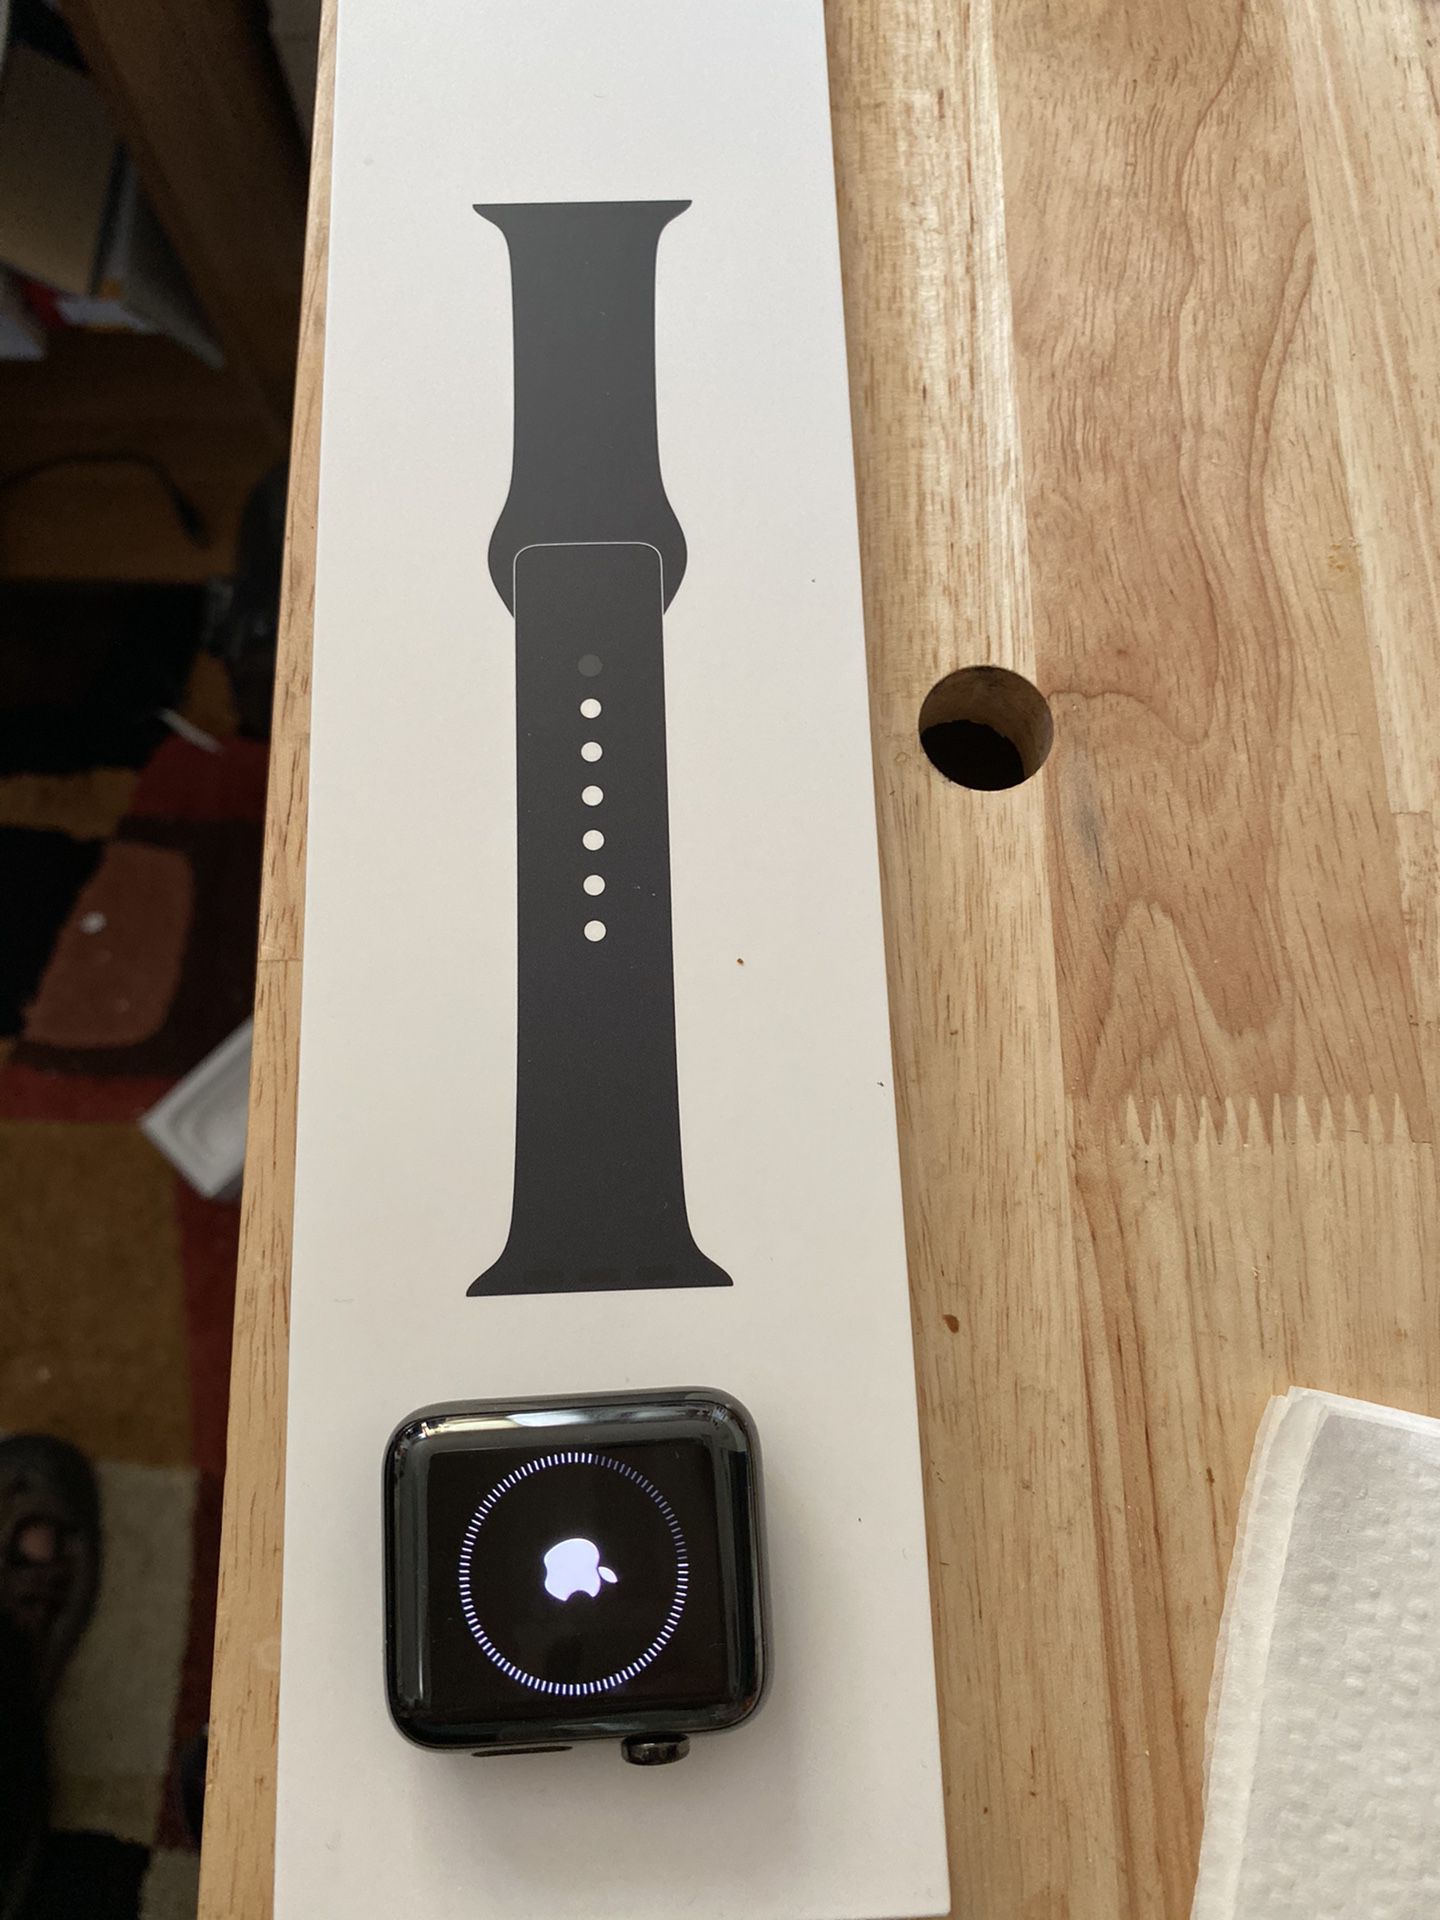 Apple Watch Stainless Steel 3rd gen. With GPS and Cellular